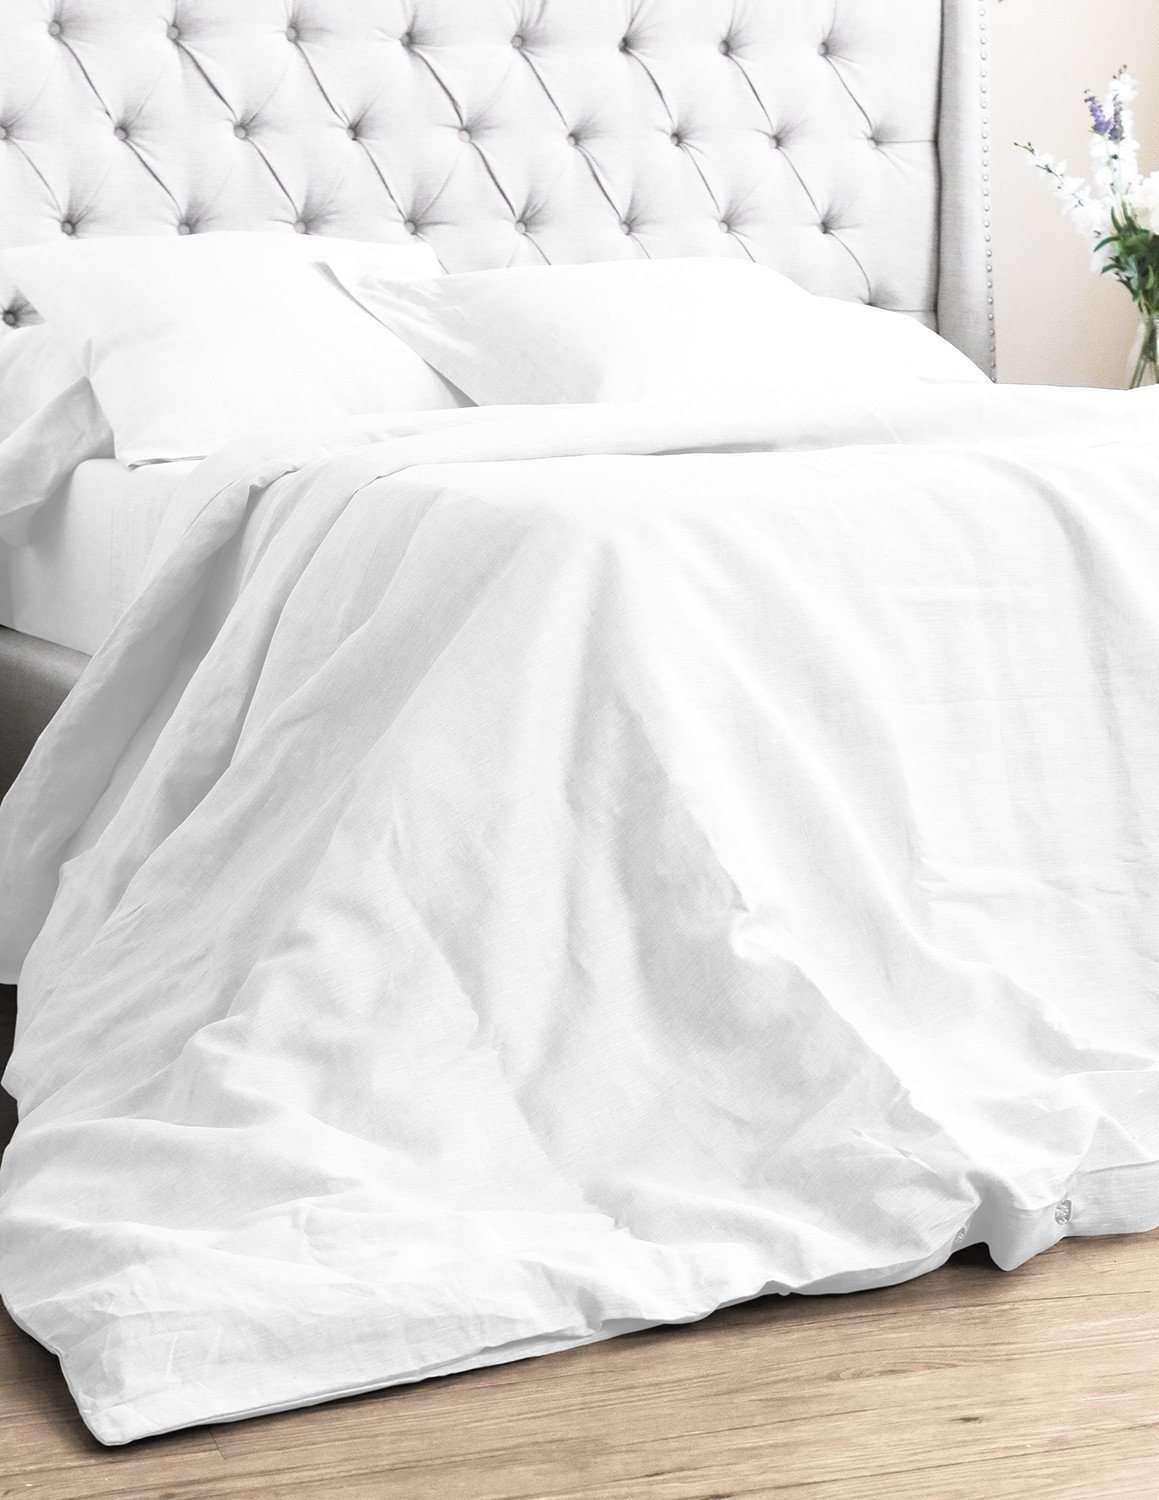 Paola Italian Linen Duvet Cover Shop Luxury Bedding And Bath At